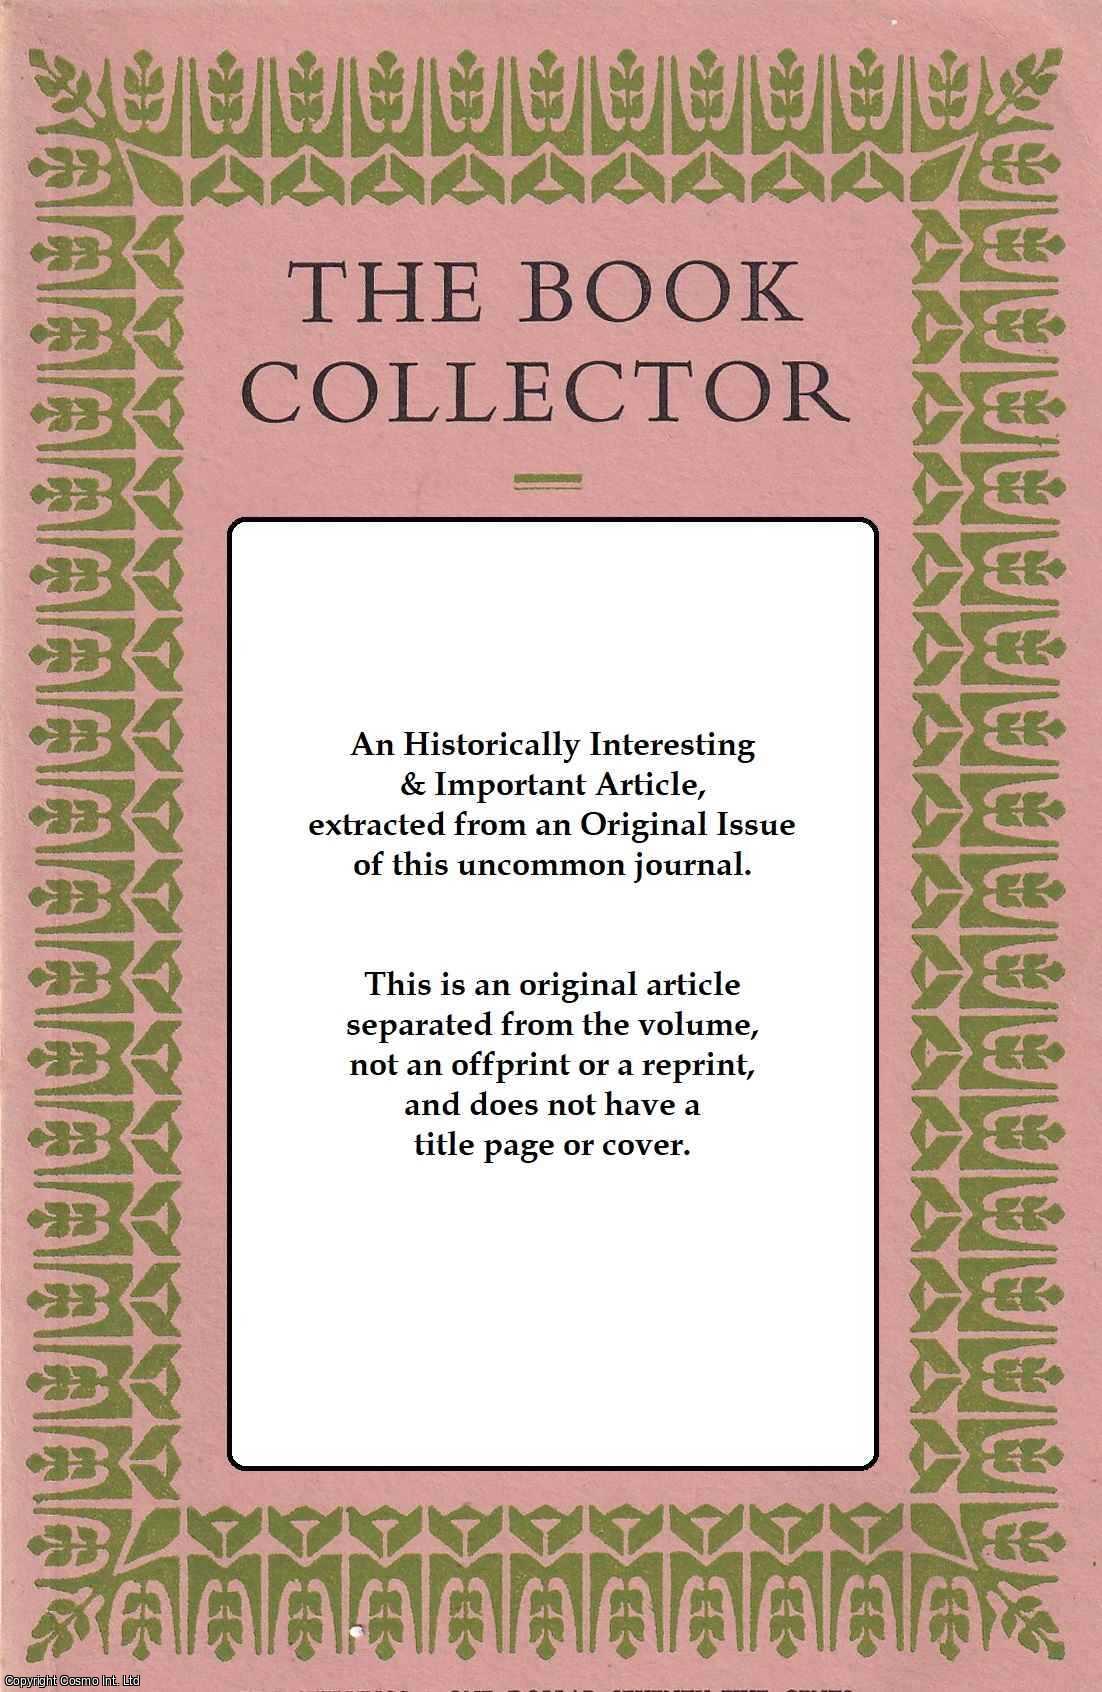 Michael Hunter - The British Library and The Library of John Evelyn. This is an original article separated from an issue of The Book Collector journal, 1995.